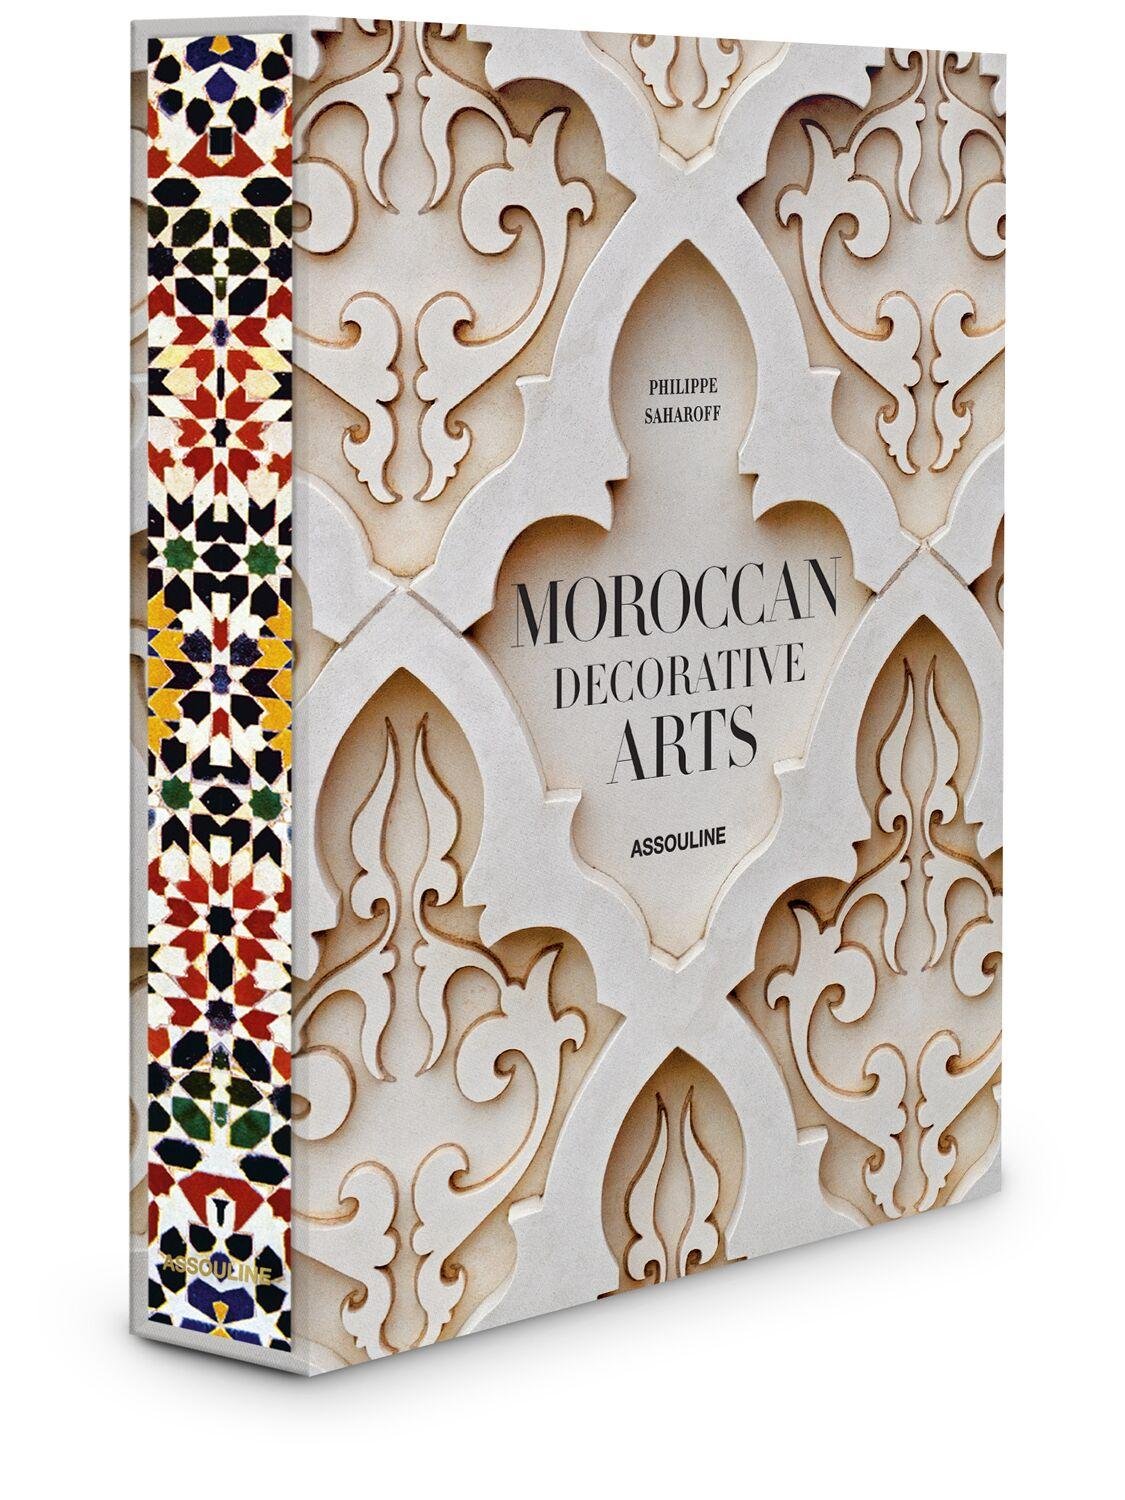 Moroccan Decorative Arts by ASSOULINE